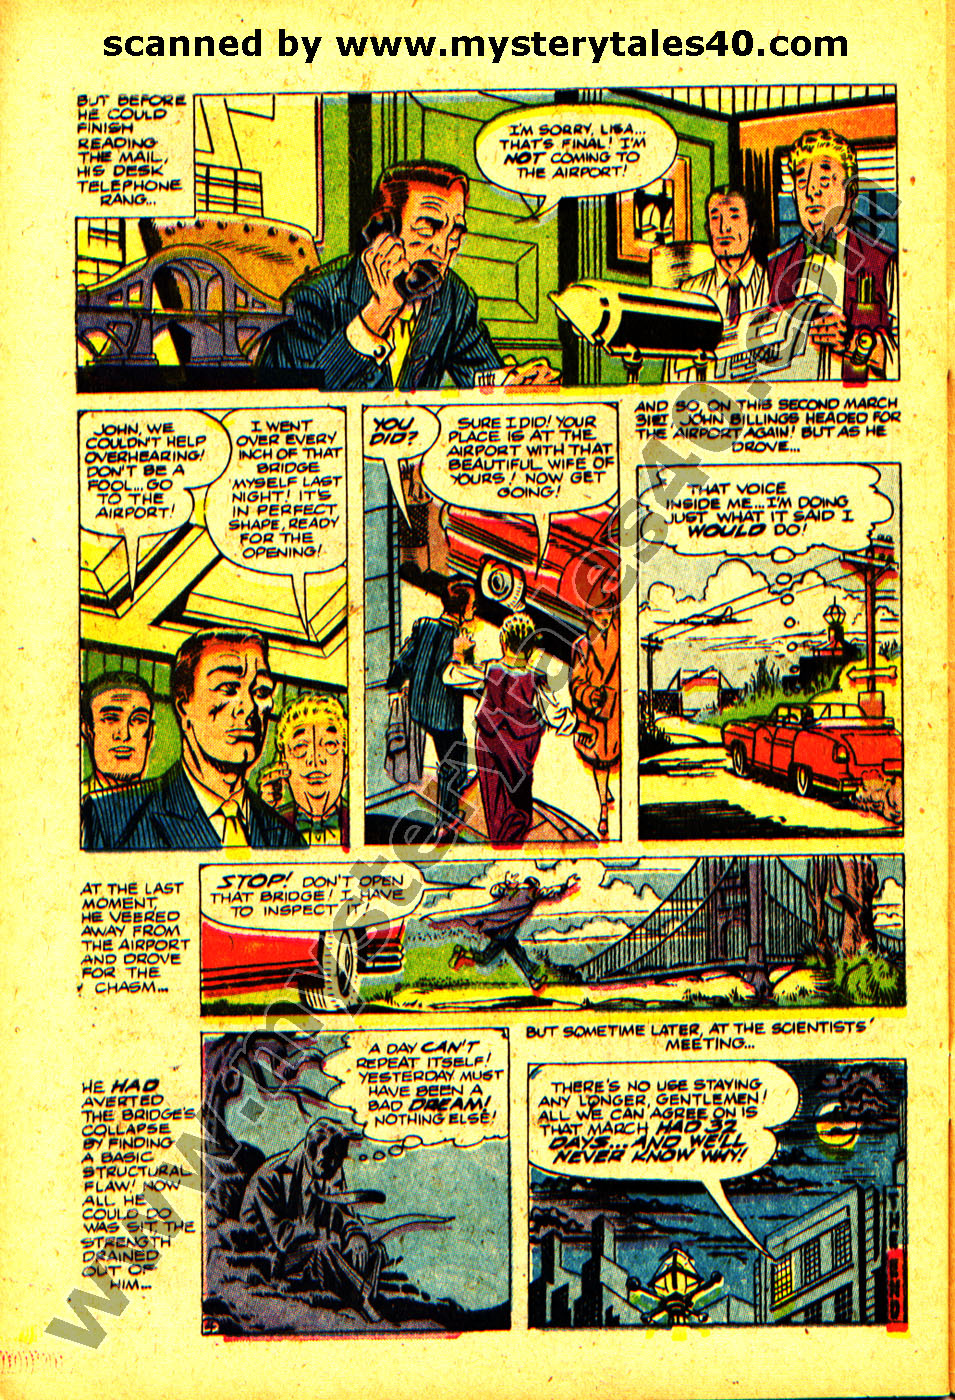 Read online Mystery Tales comic -  Issue #40 - 26